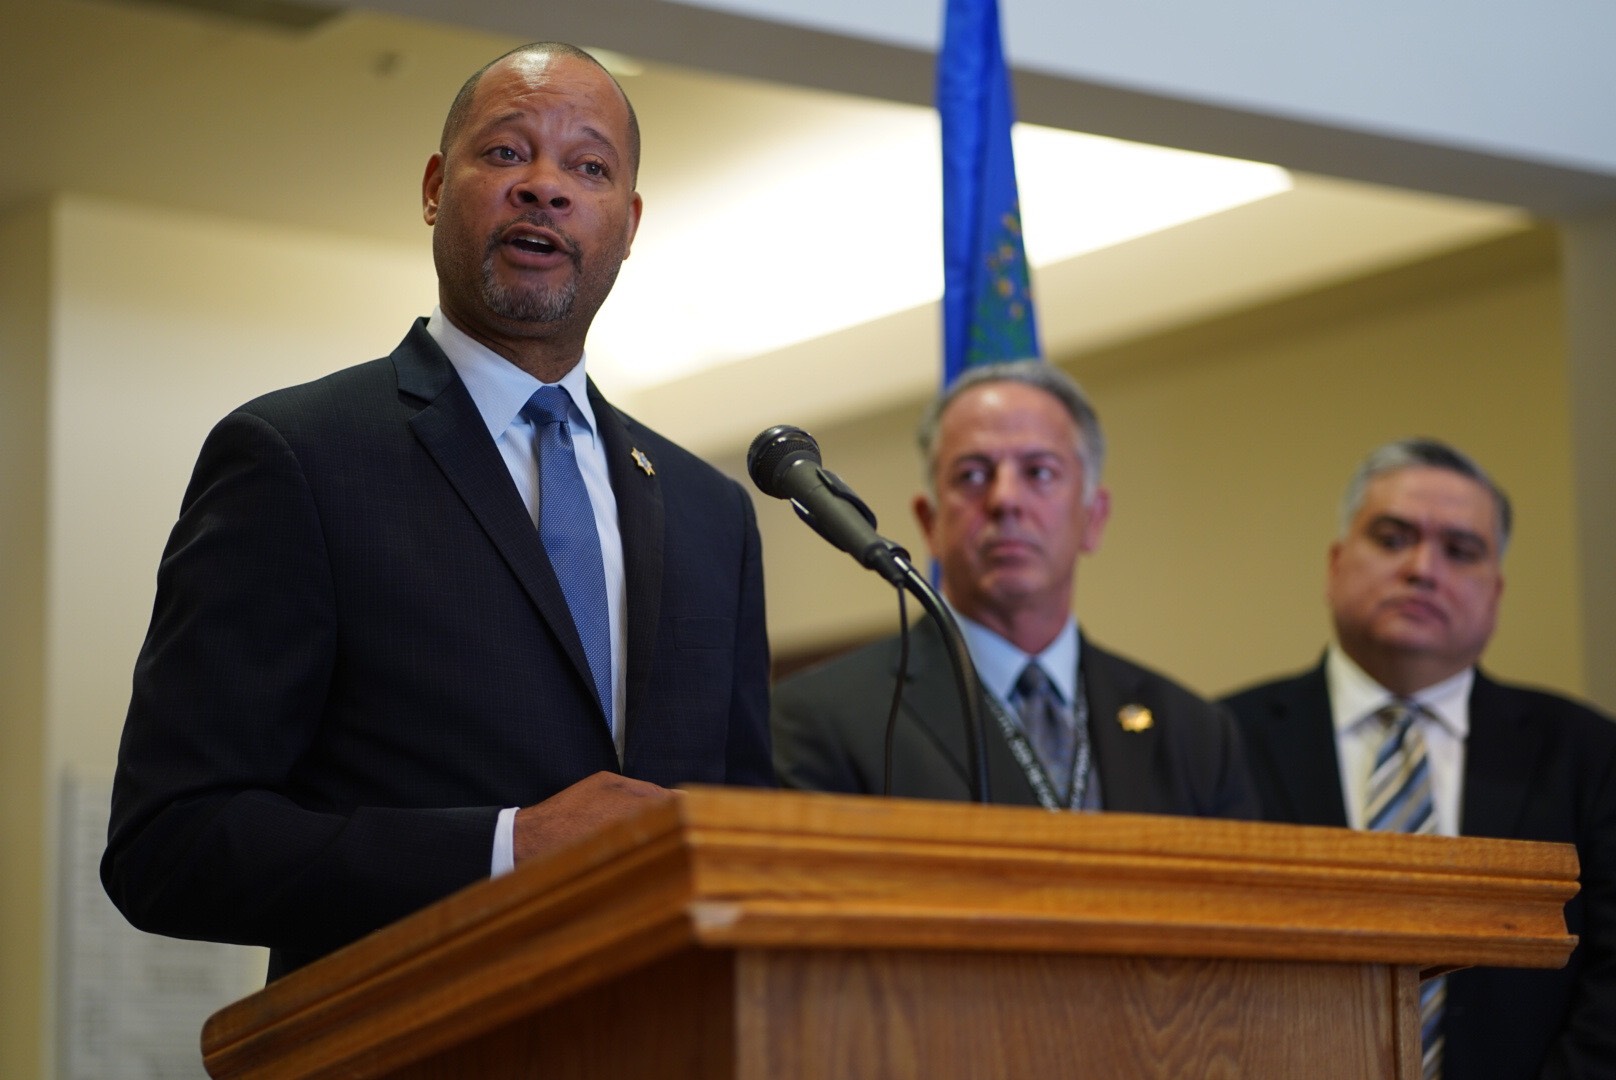 Attorney General Aaron Ford at a press conference for opioid lawsuits